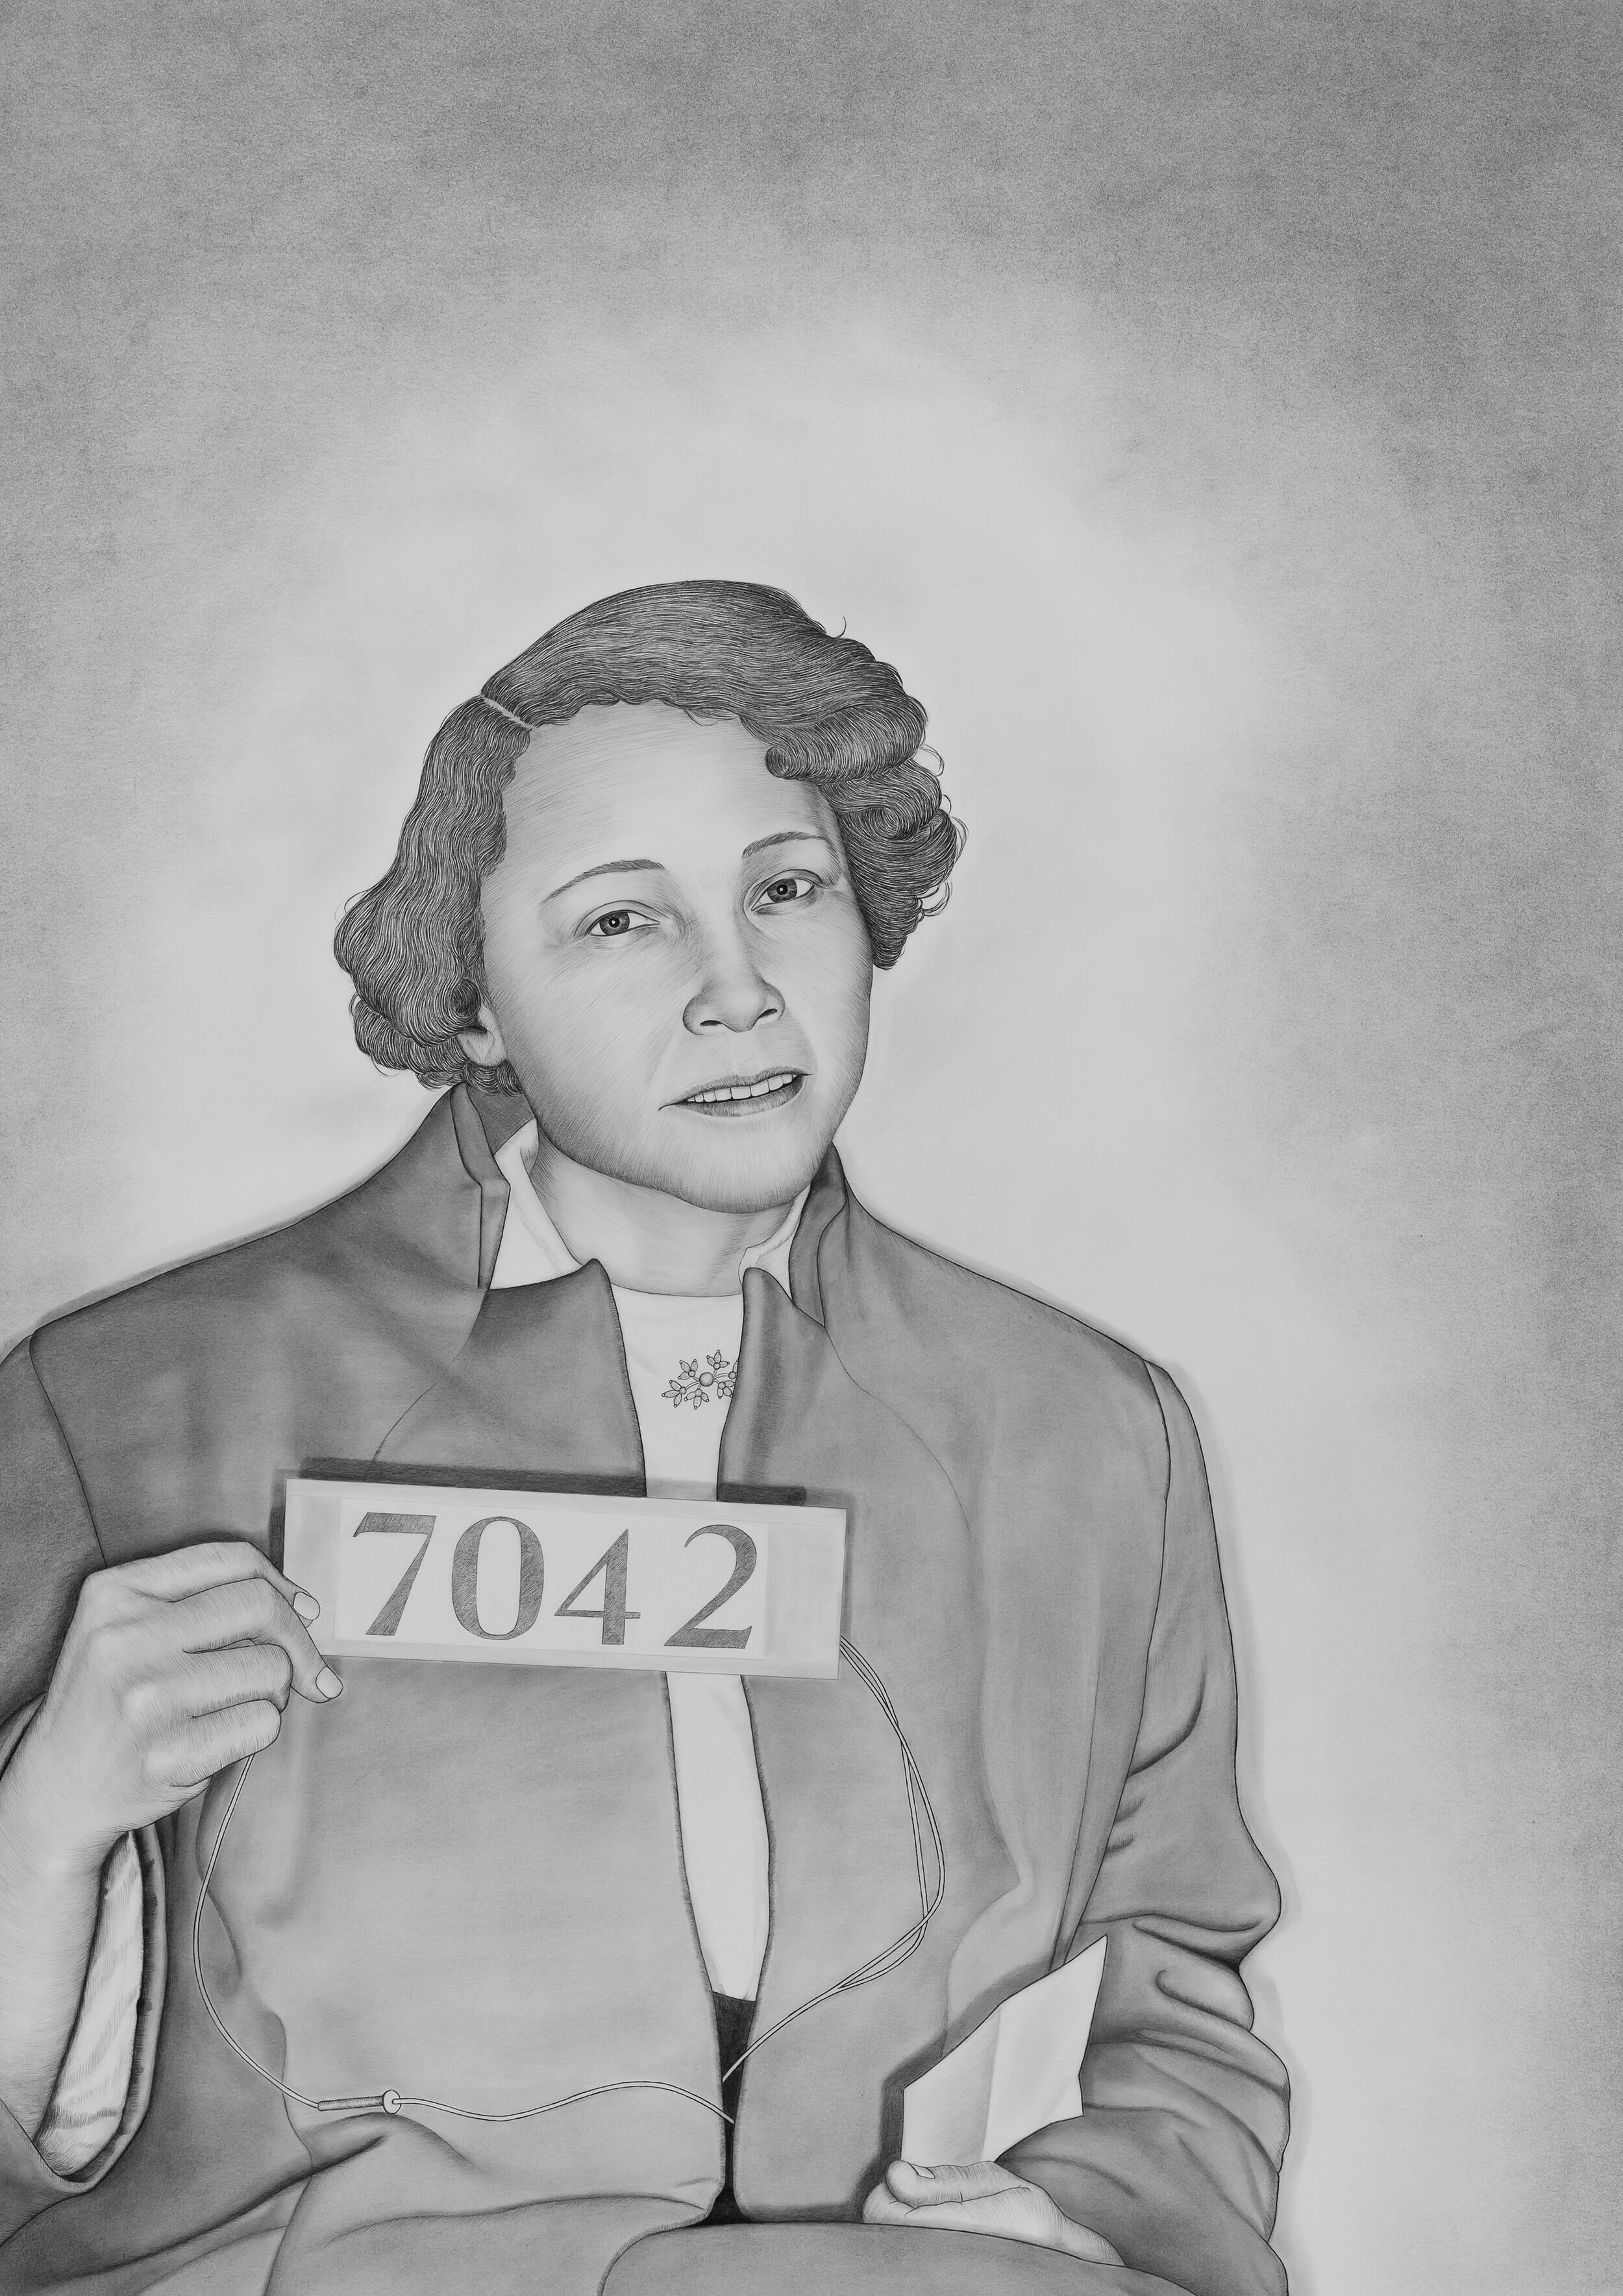  Lava Thomas.  Mugshot Portraits: Women of the Montgomery Bus Boycott, Jo Ann Robinson , 2018. Graphite and Conté pencil on paper, 47 x 33 ¼ inches. Collection of Janet Mohle-Boetani, MD. Image courtesy of the artist and Rena Bransten Gallery. Photo